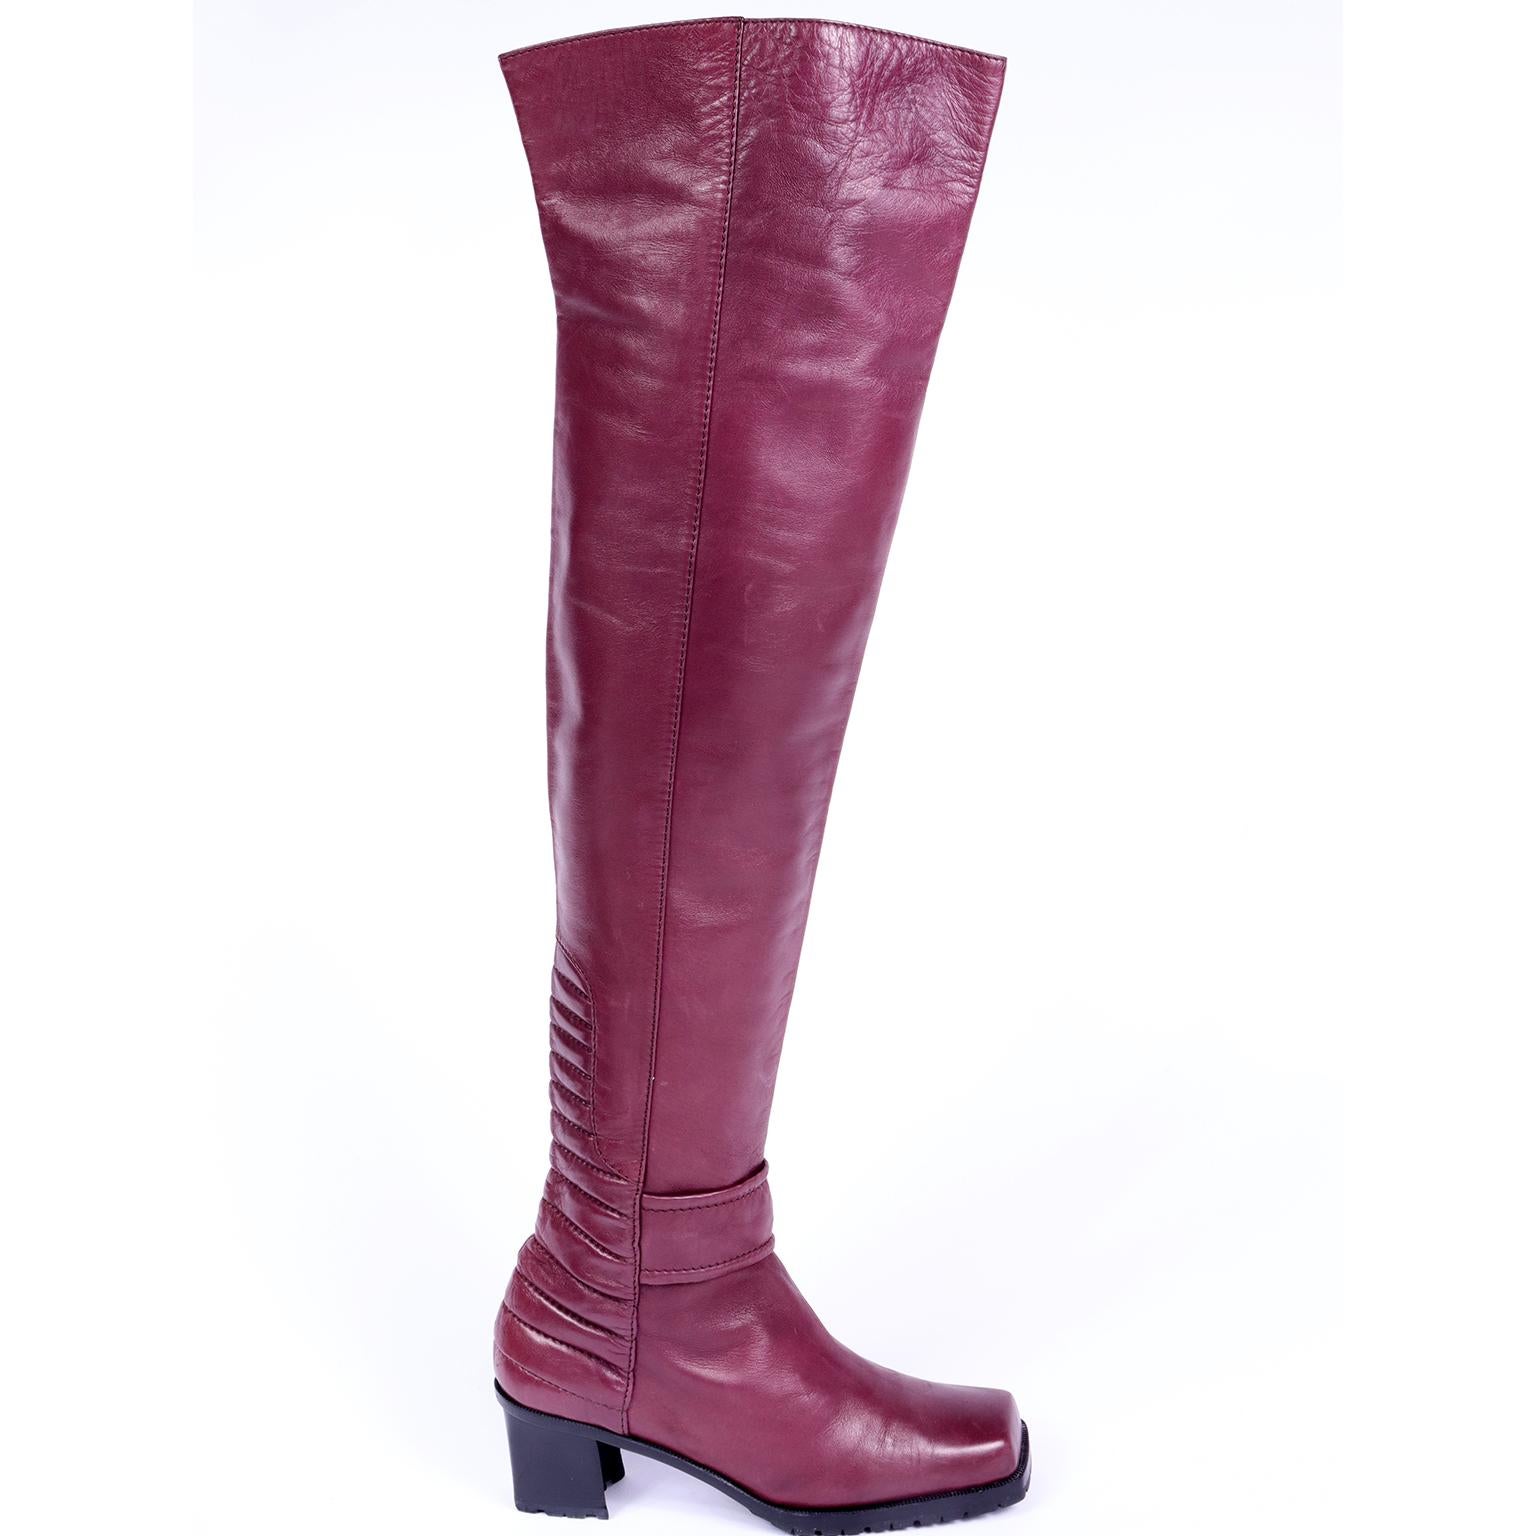 Women's Vintage Claude Montana Thigh High Leather Deep Aubergine Fine Leather Boots